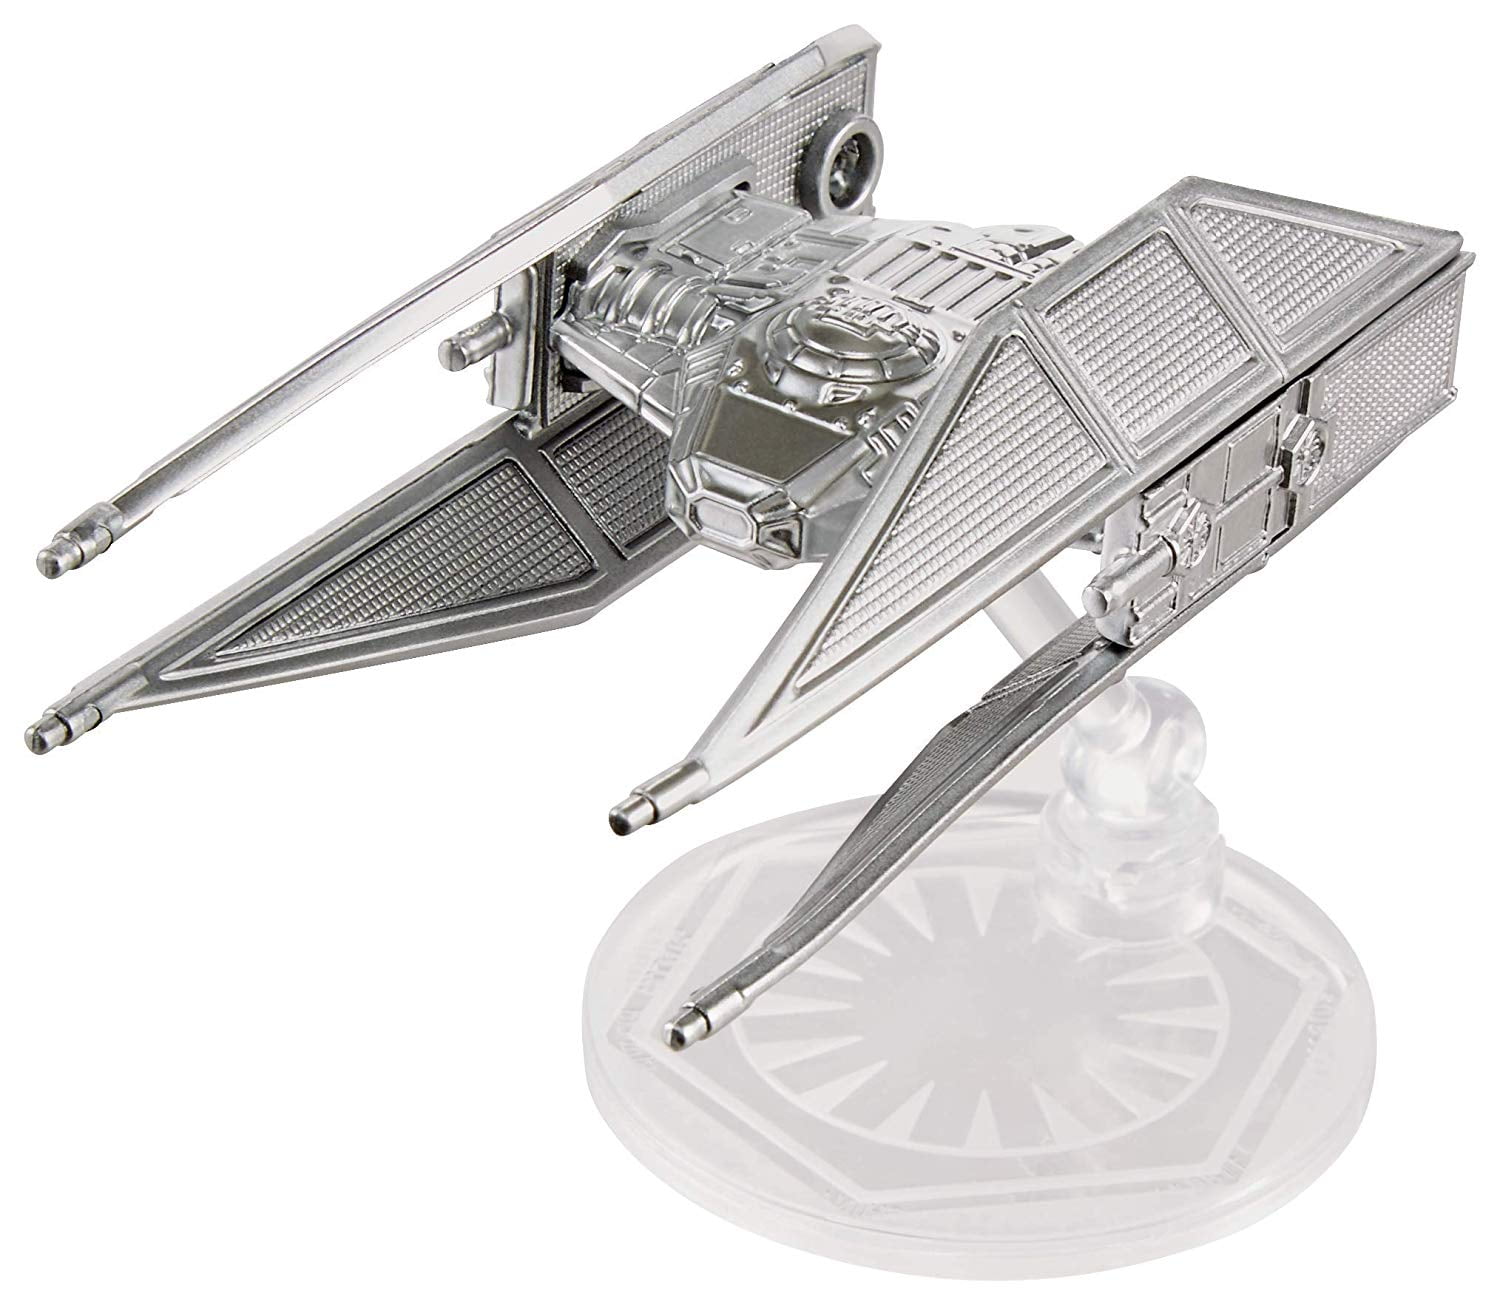 2019 Hot Wheels Details about   TIE Fighter Star Wars Commemorative Starships 